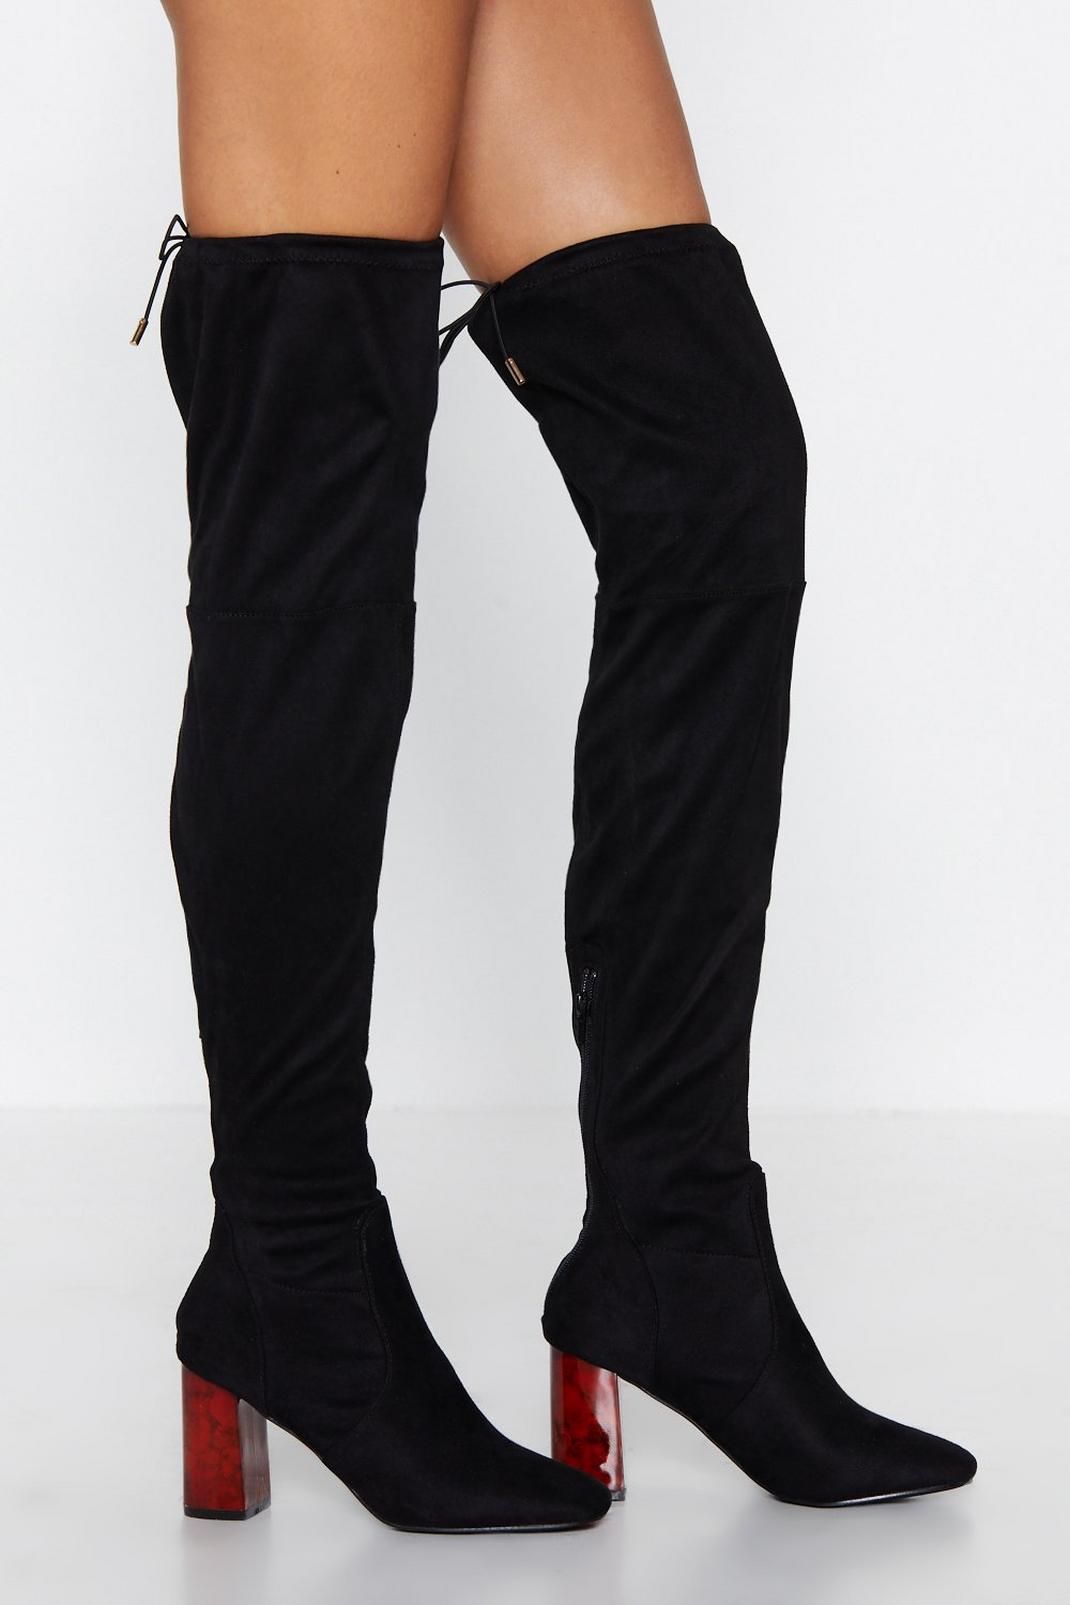 Tort New Shoes Thigh-High Boot | Nasty Gal